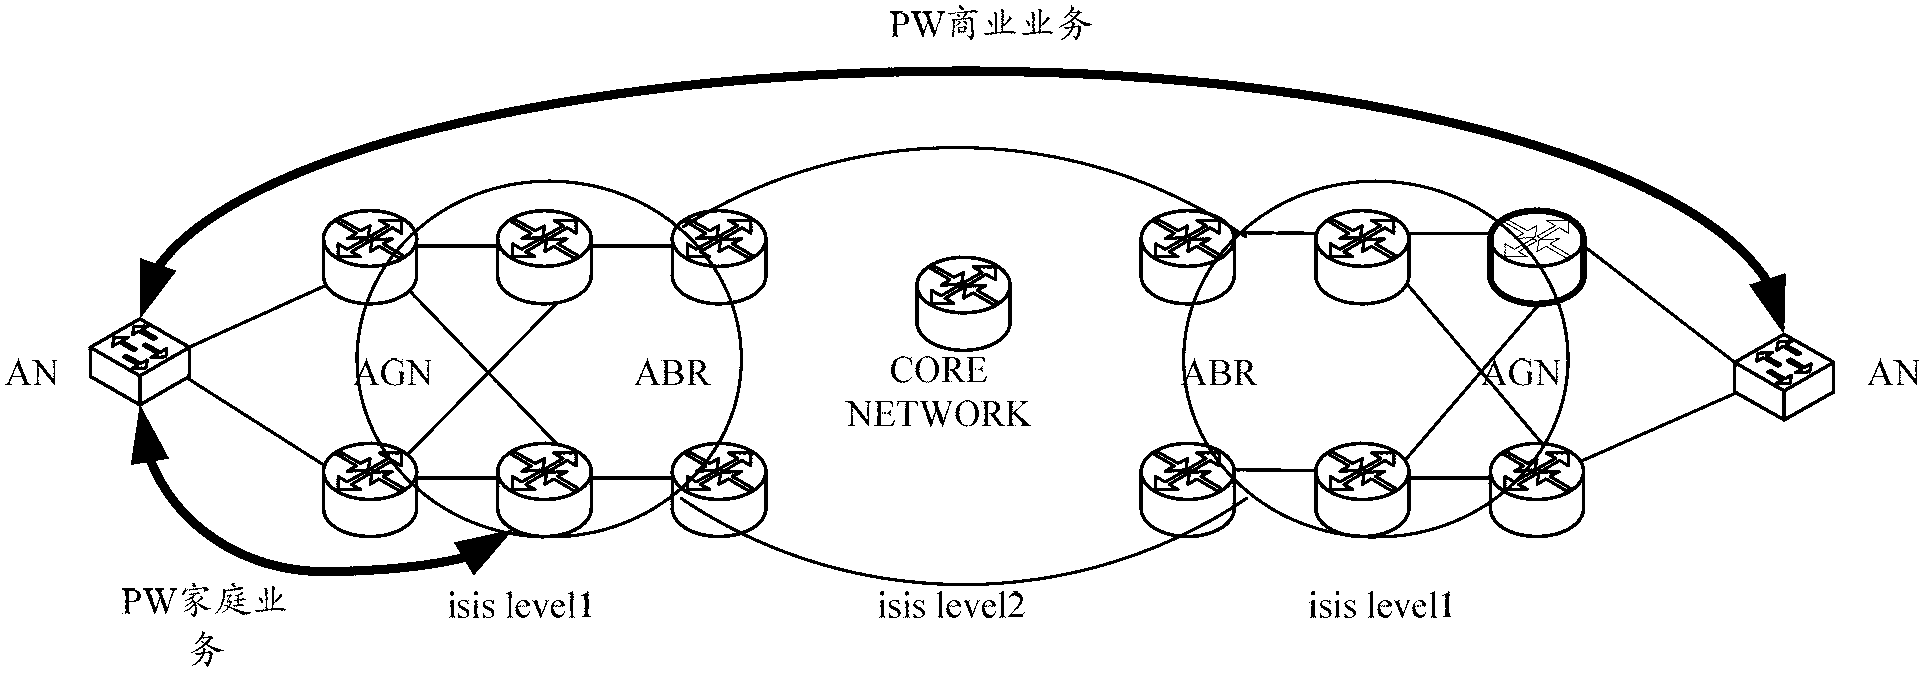 Method, system and device for establishing and removing cross-domain LSP (Label Switching Path)